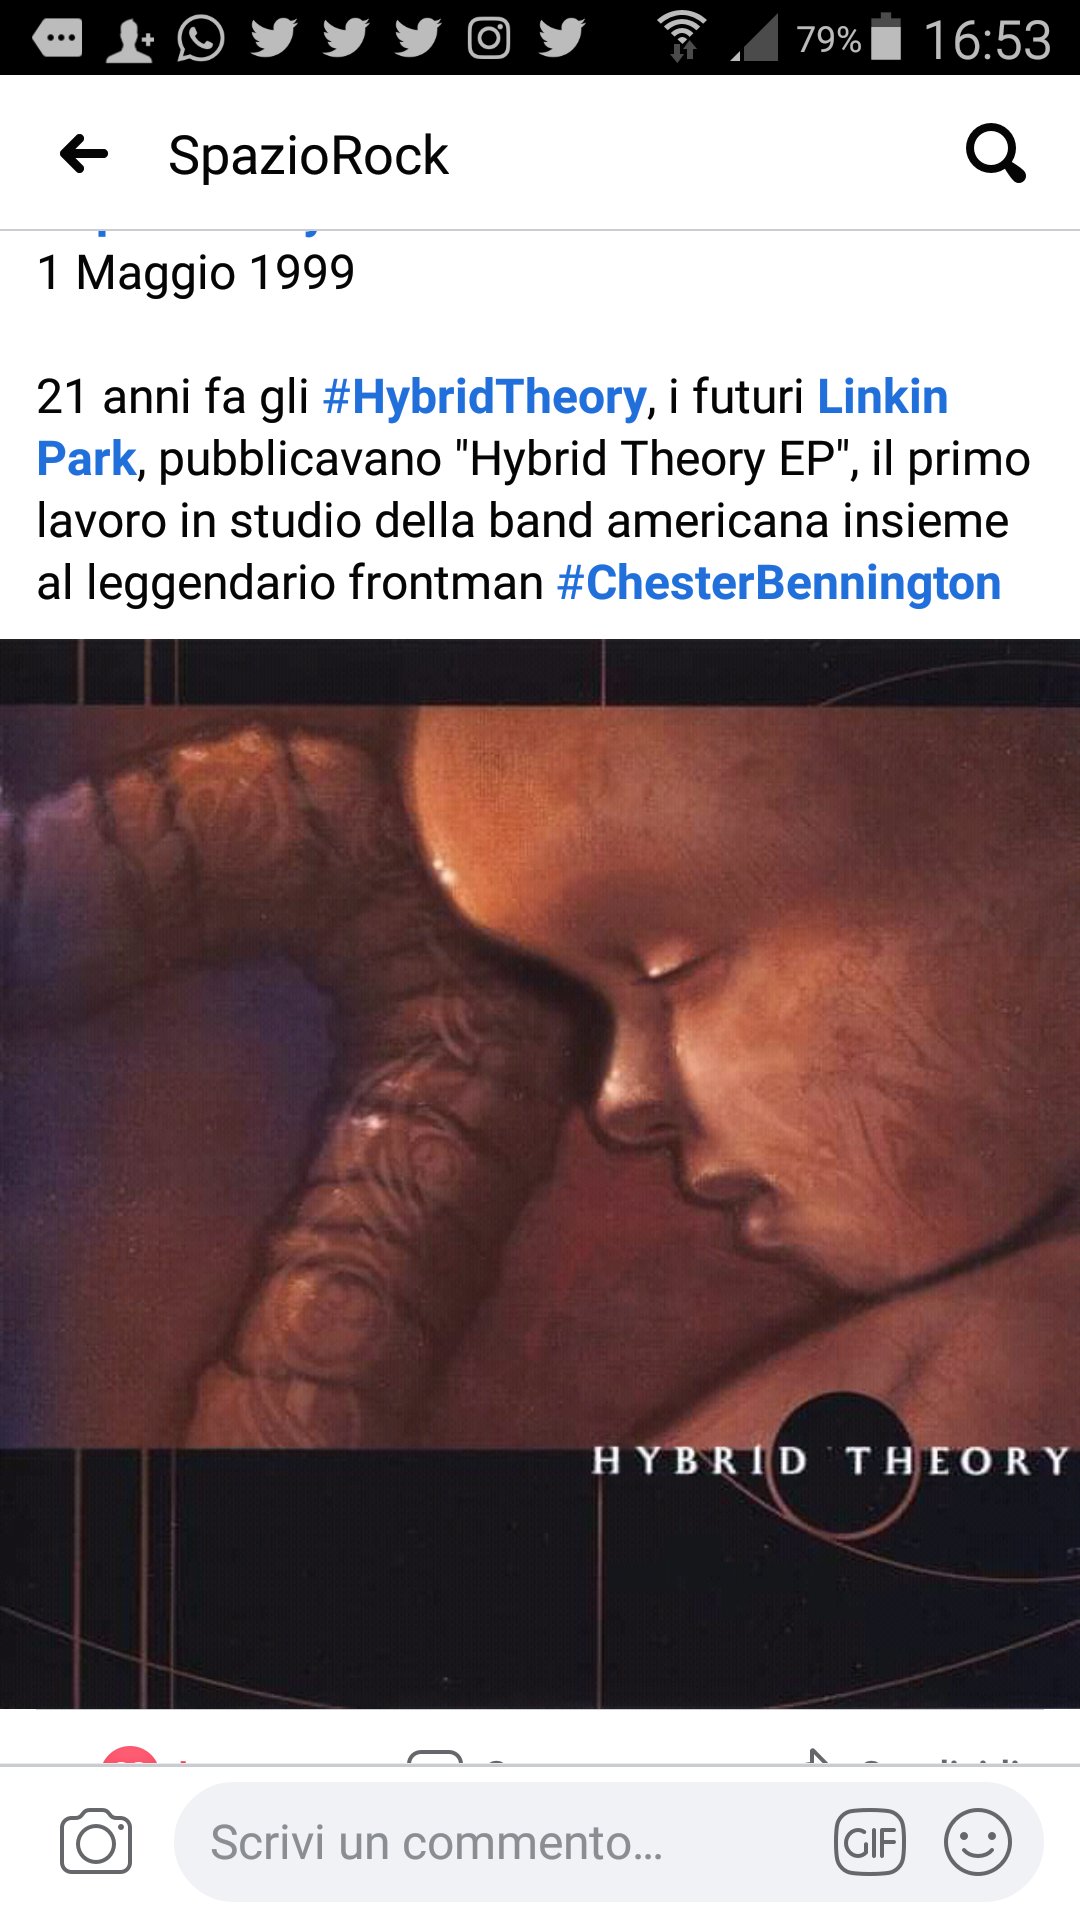 Sara Happy 21 Years Hybrid Theory Ep Before That Chesterbe Mikeshinoda Phoenixlp Joehahnlp Braddelson Robbourdon Would Have Been Linkinpark They Were Hybrid Theory 1999 Makechesterproud Linkinpark Chesterbennington